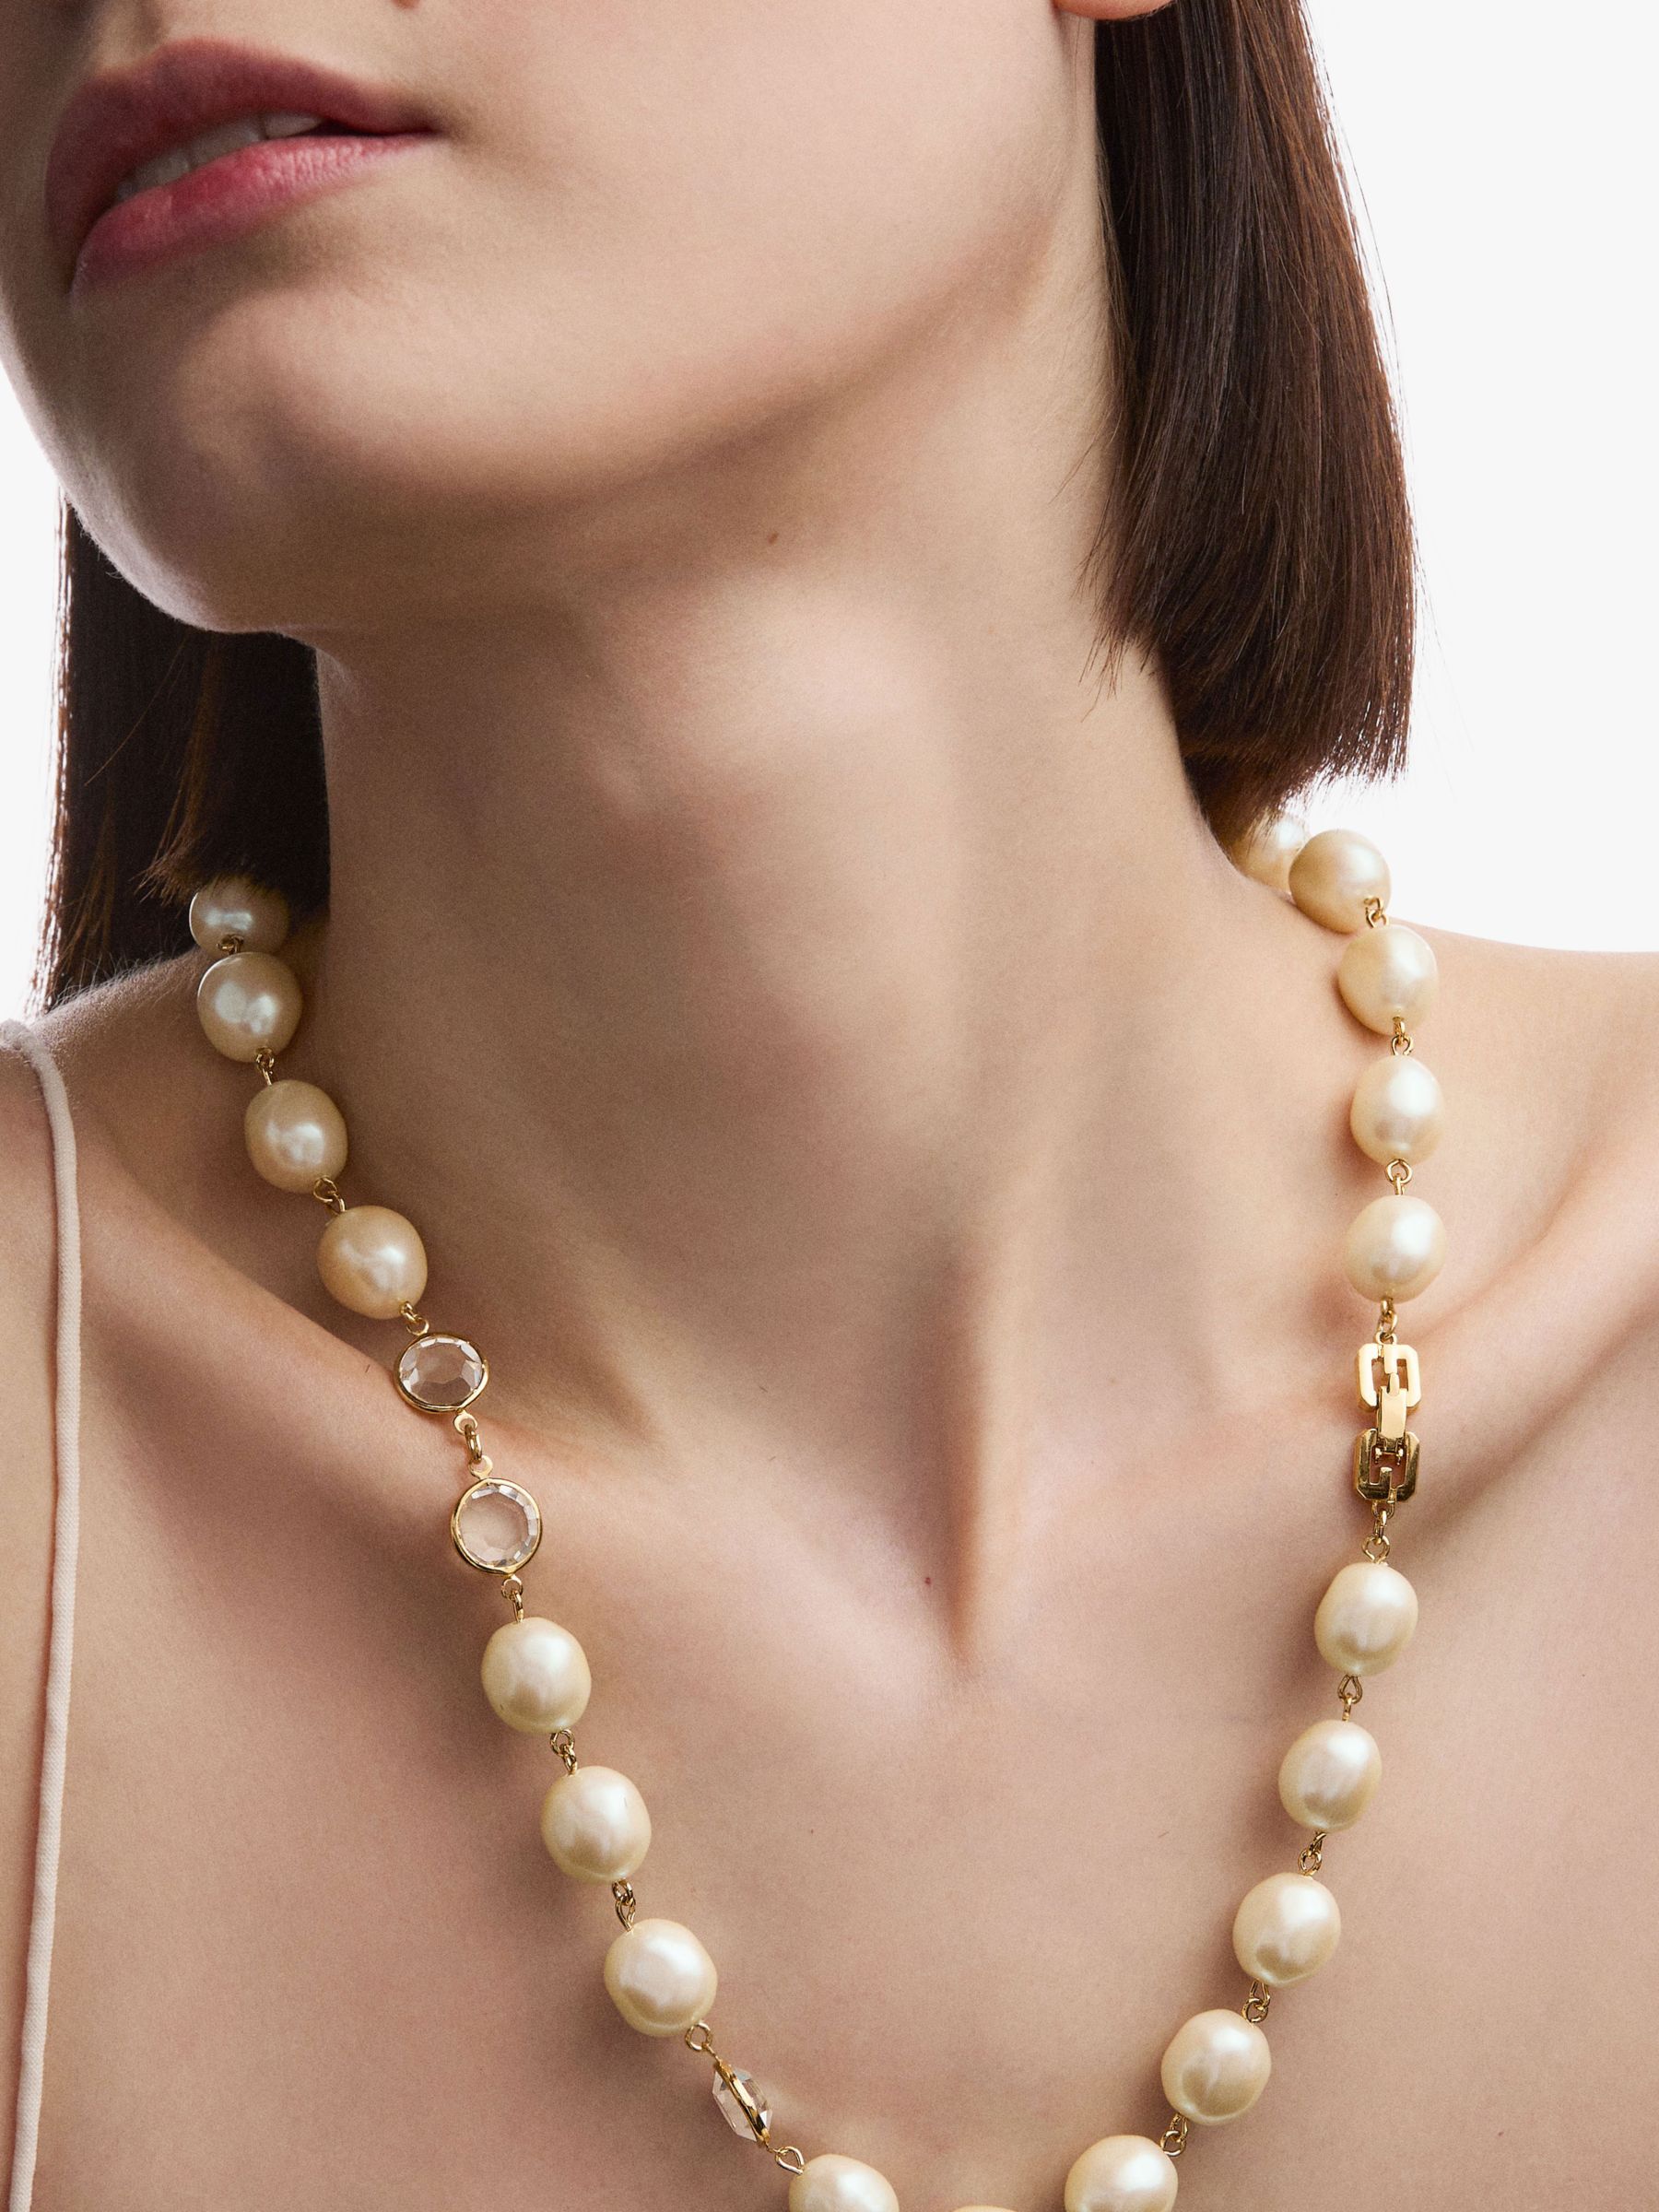 Buy Susan Caplan Vintage Givenchy Faux Pearl Necklace, Made Circa 1990s Online at johnlewis.com